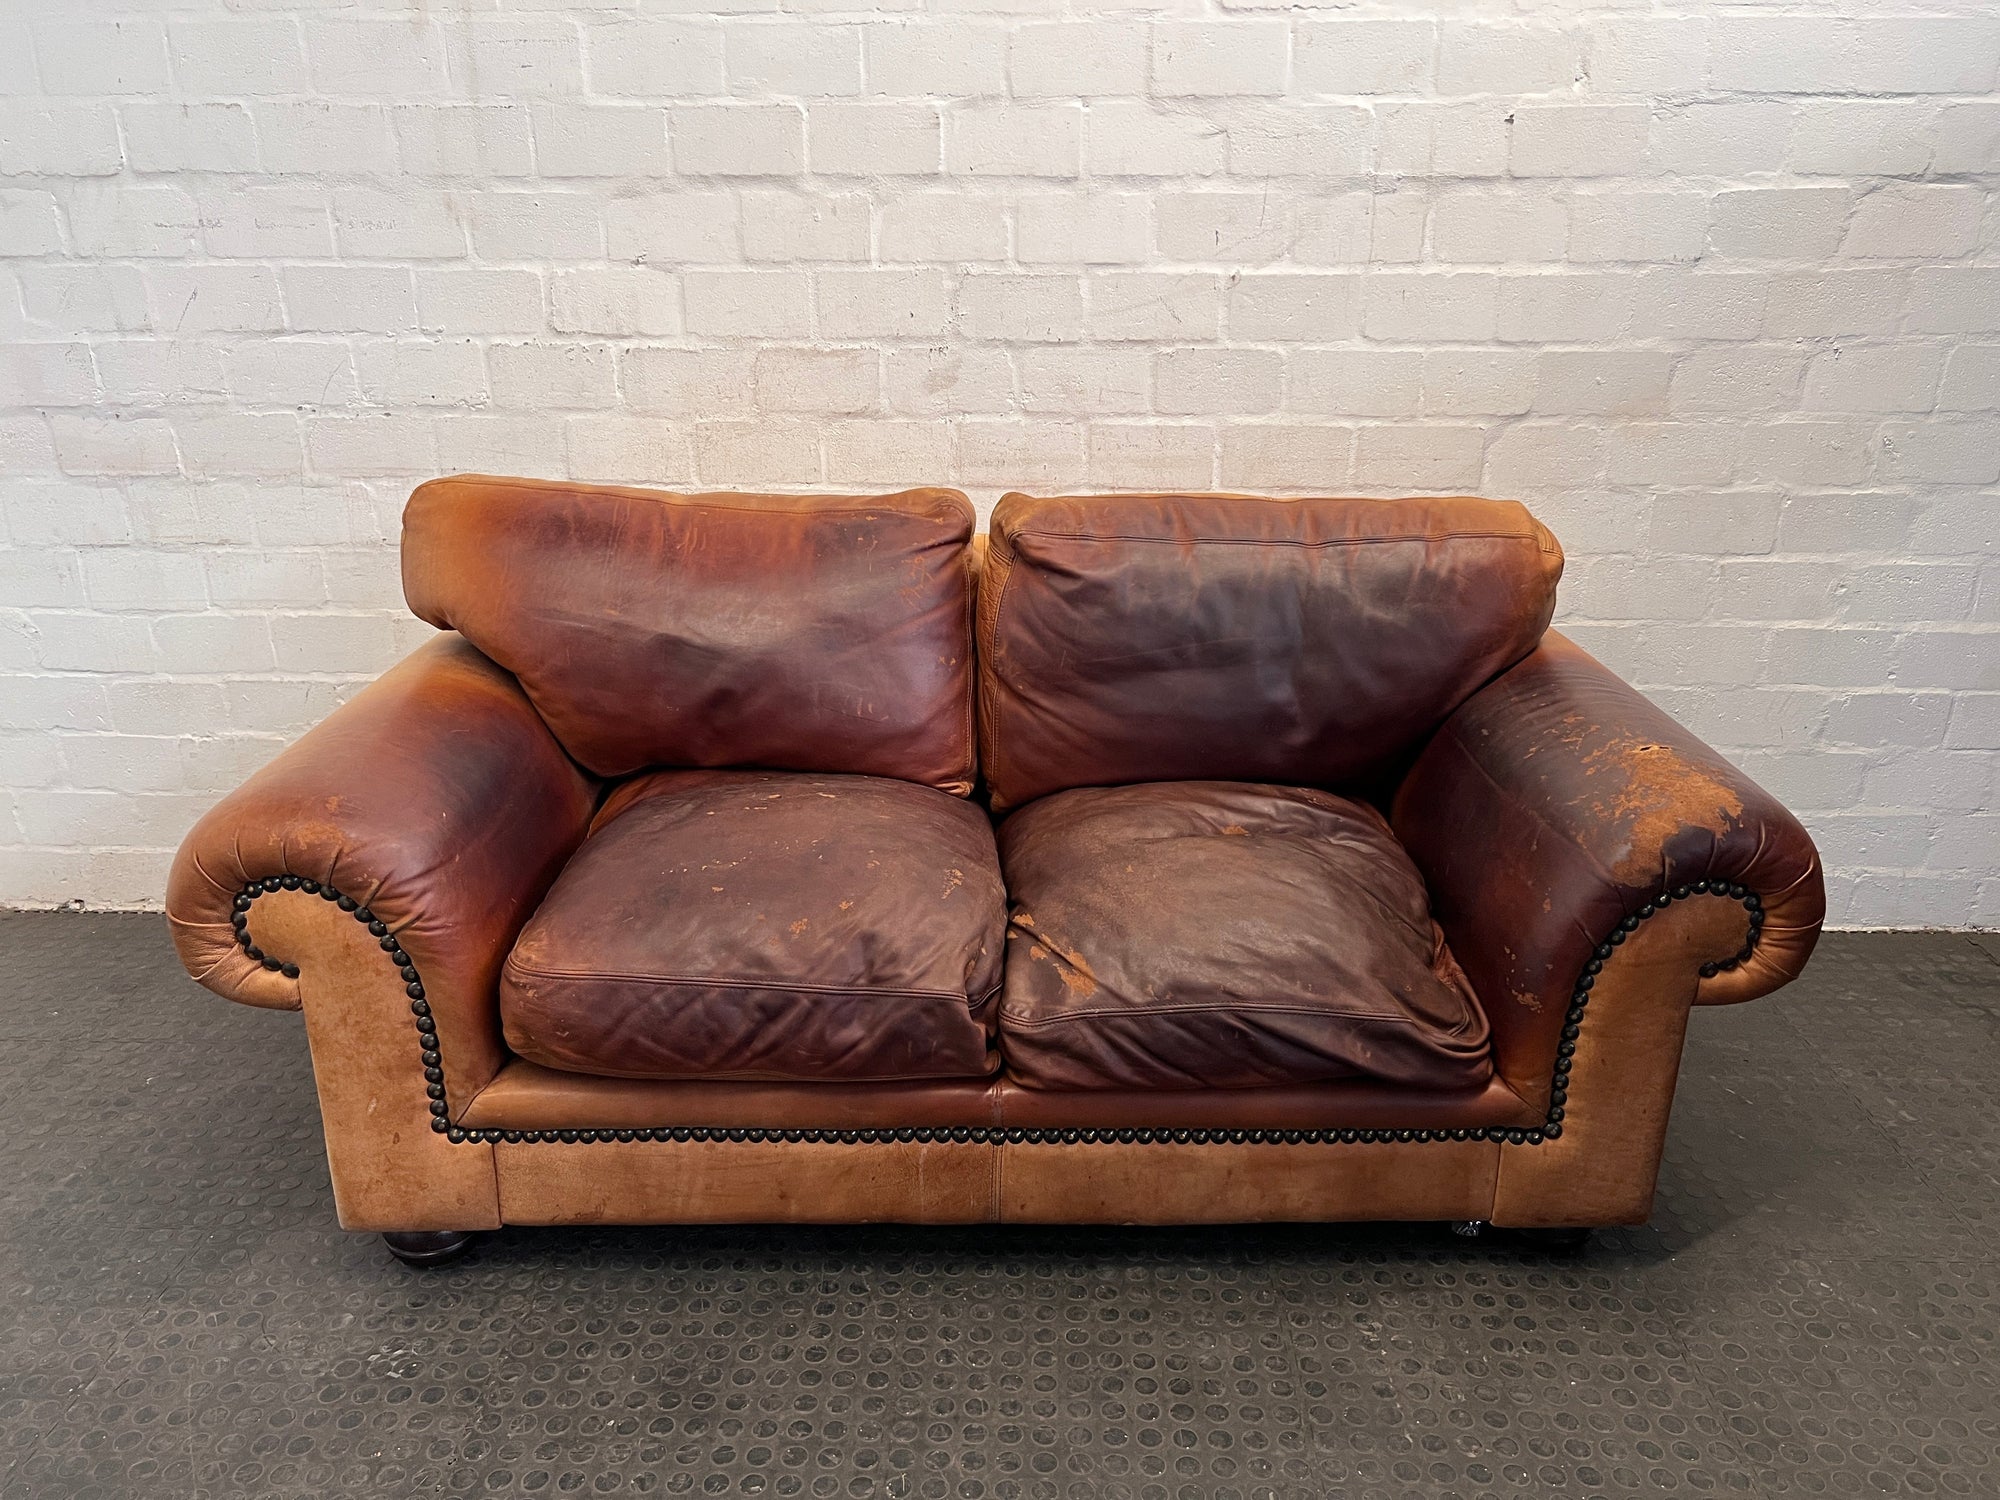 Brown Leather Two Seater Couch - REDUCED